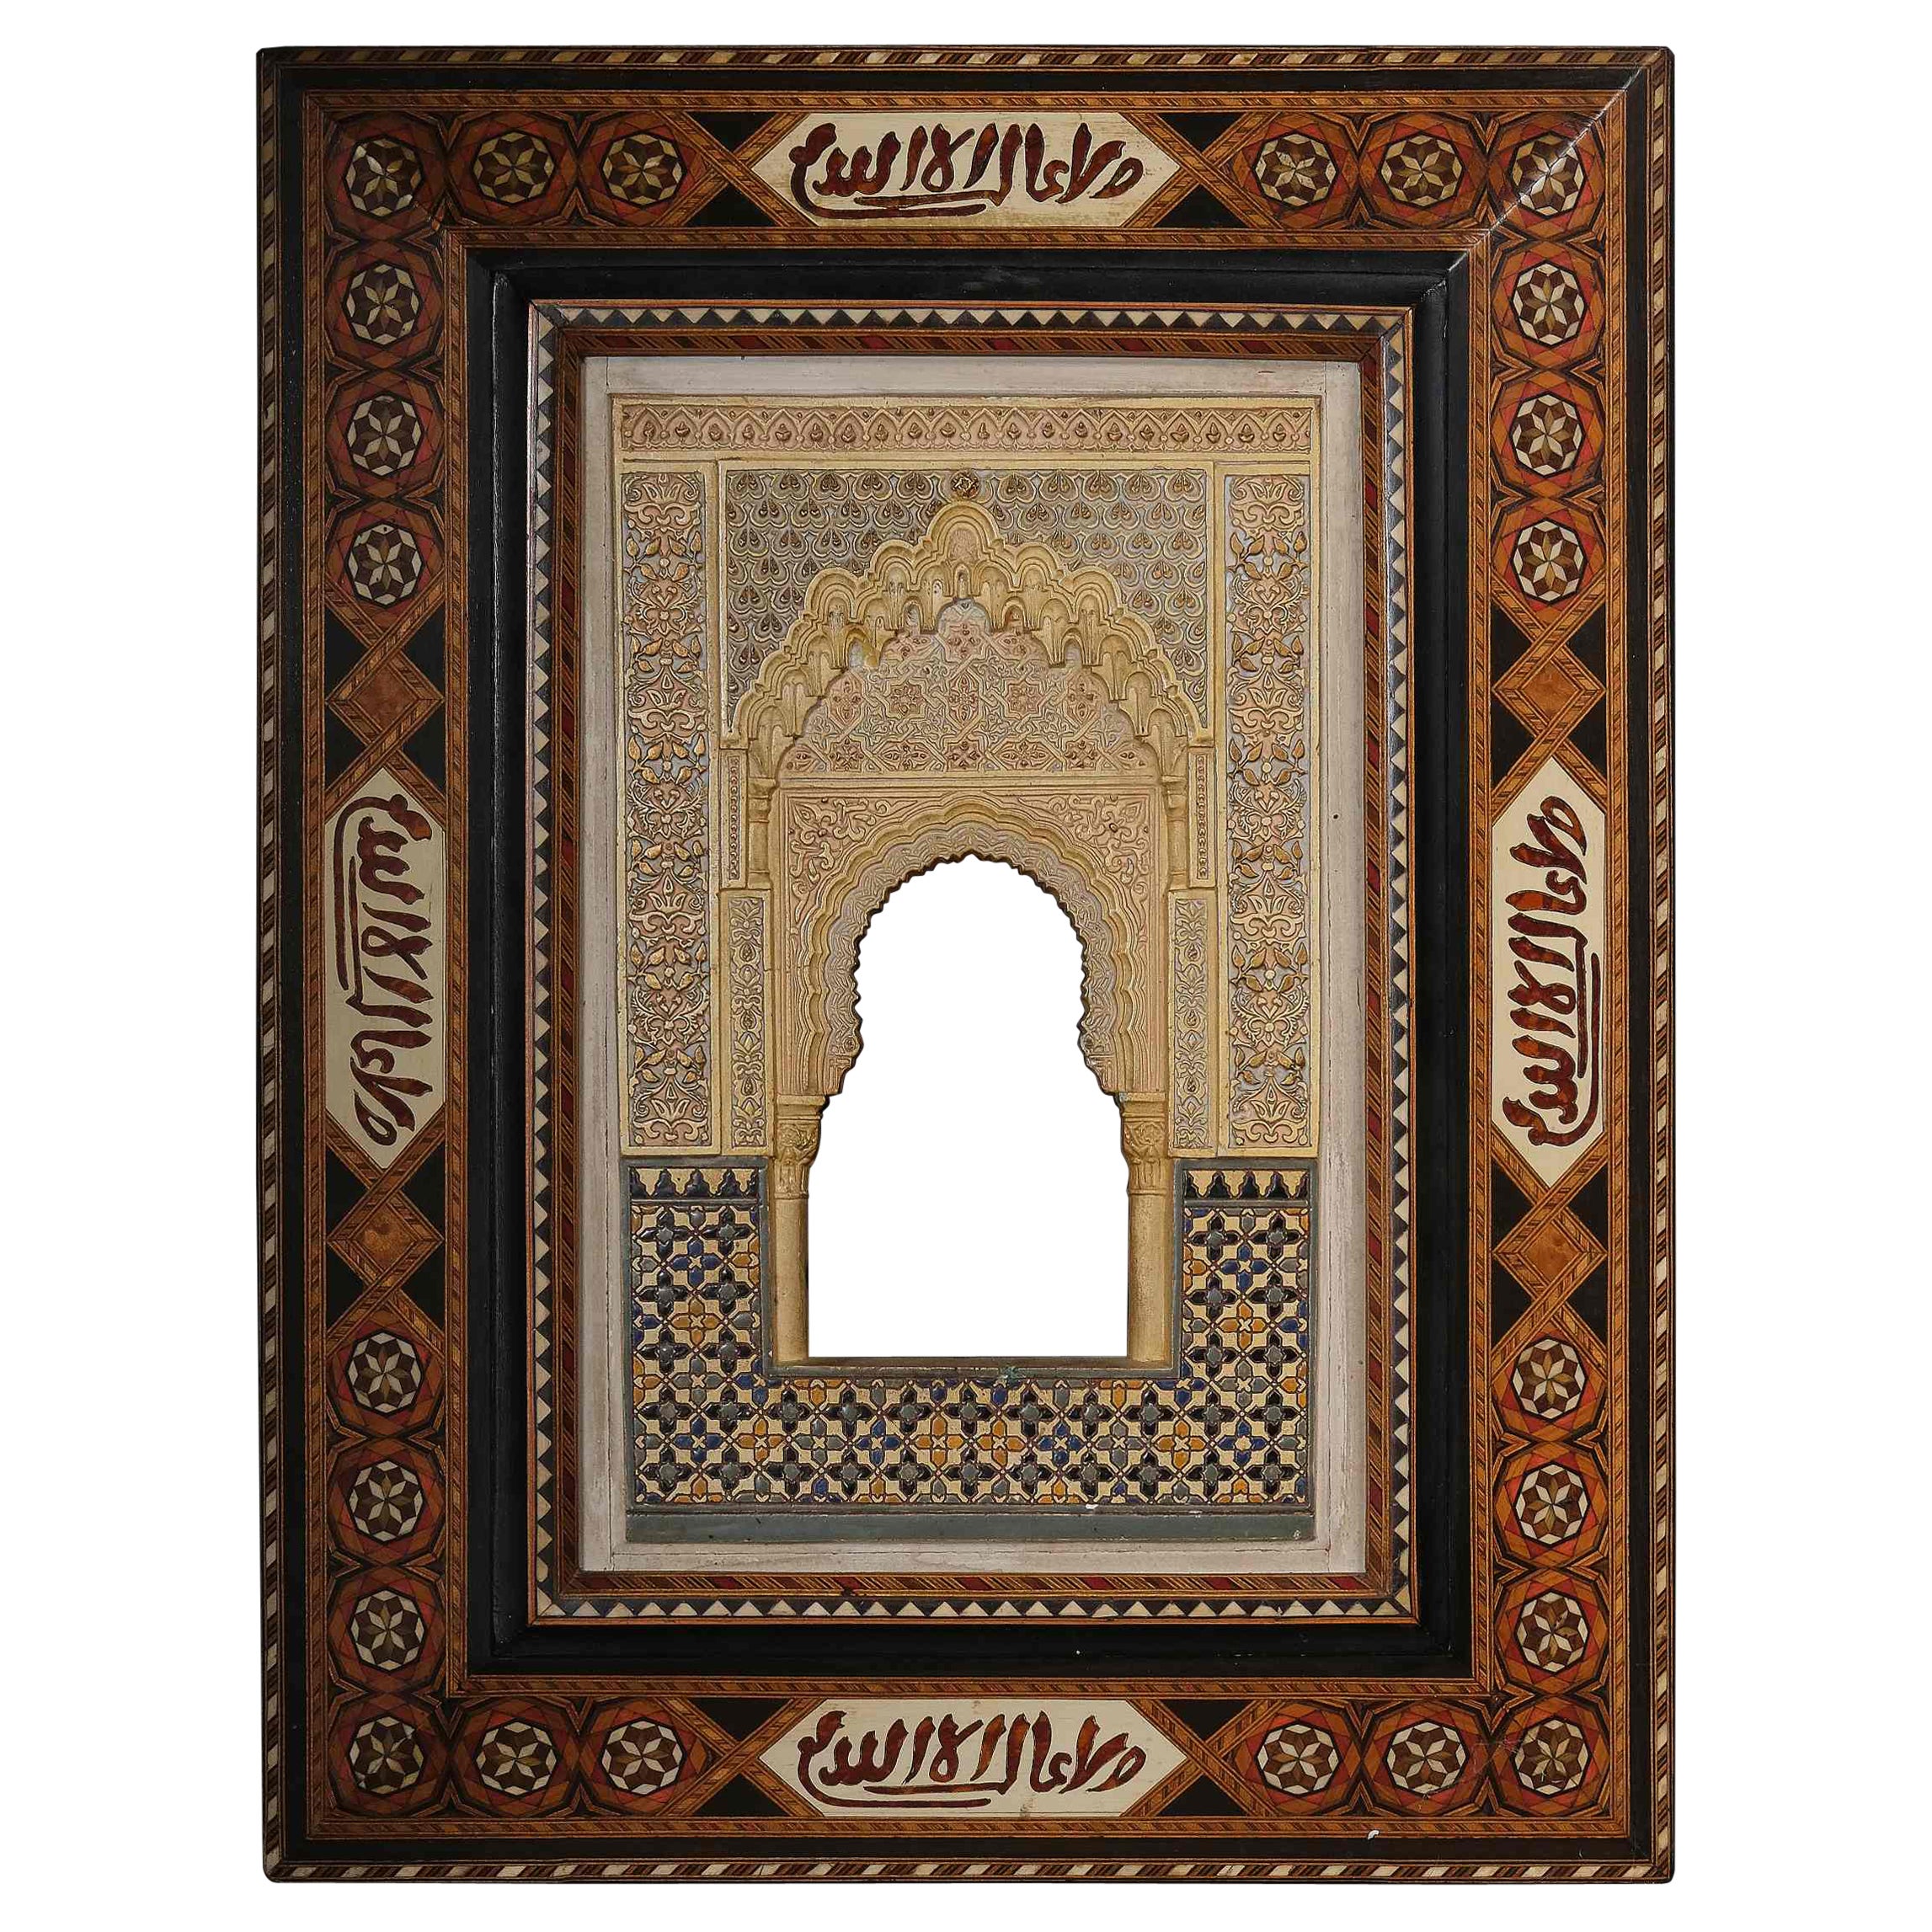 "Alhambra-Fakatmodell", Polychromed Stucco Plaque by R. Rus, Early 20th Century For Sale